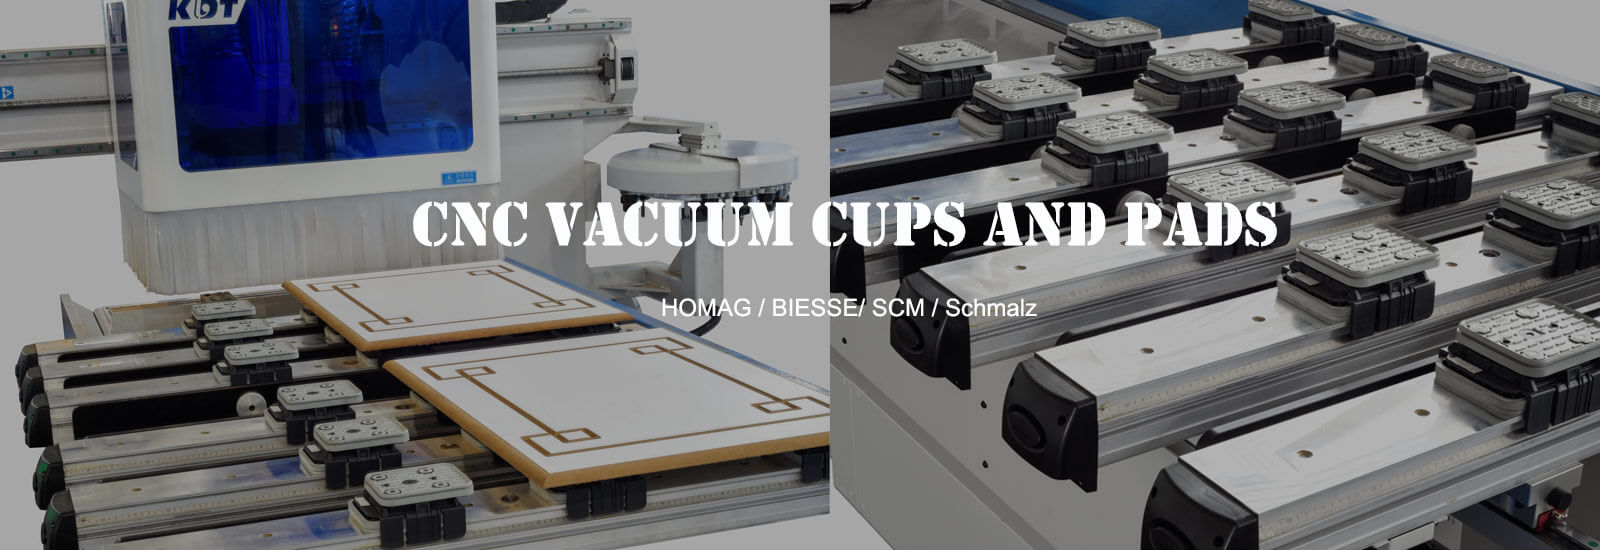 cnc vacuum cups and pads